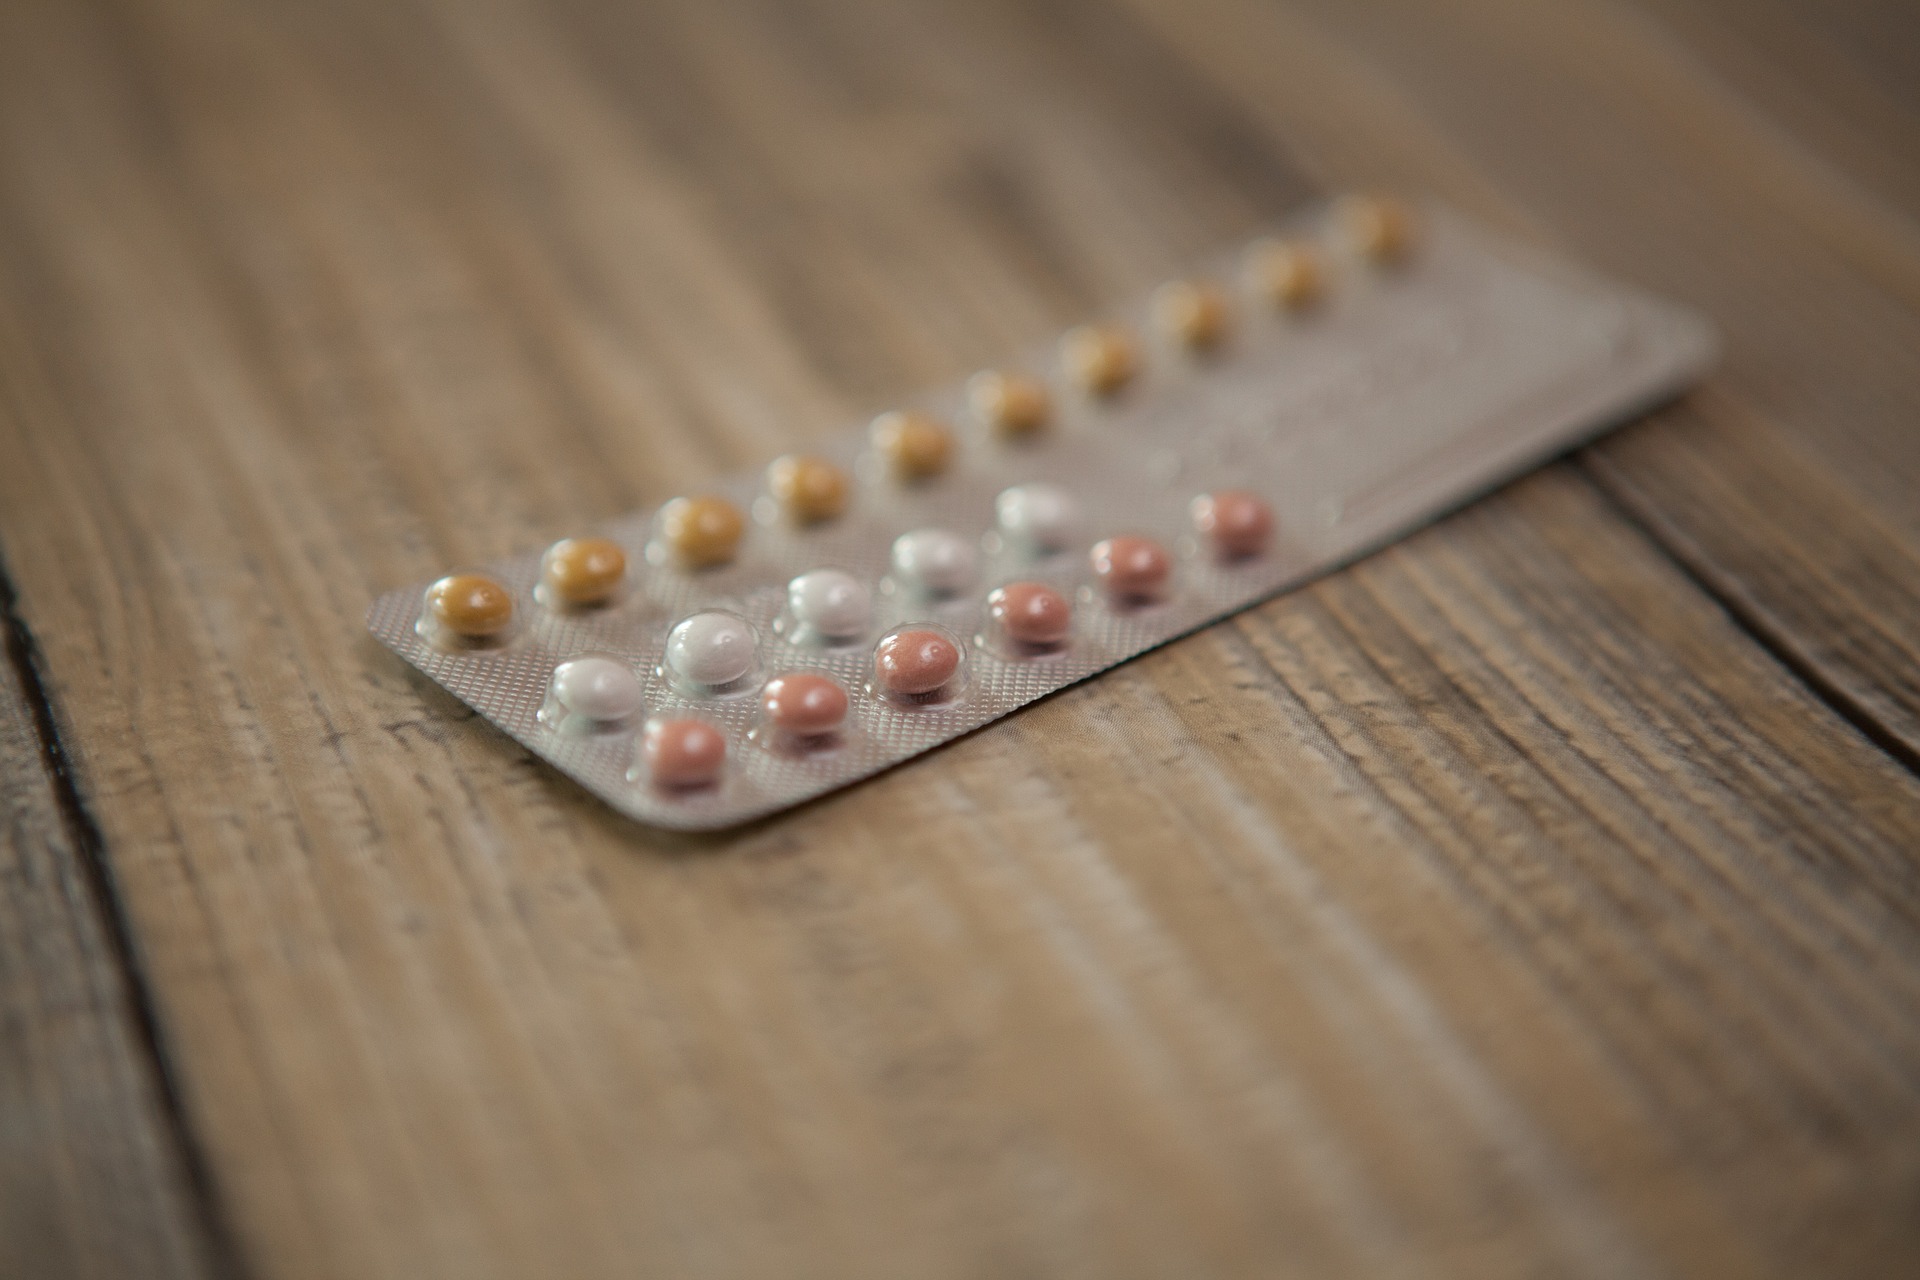 Selected Oral Contraceptives